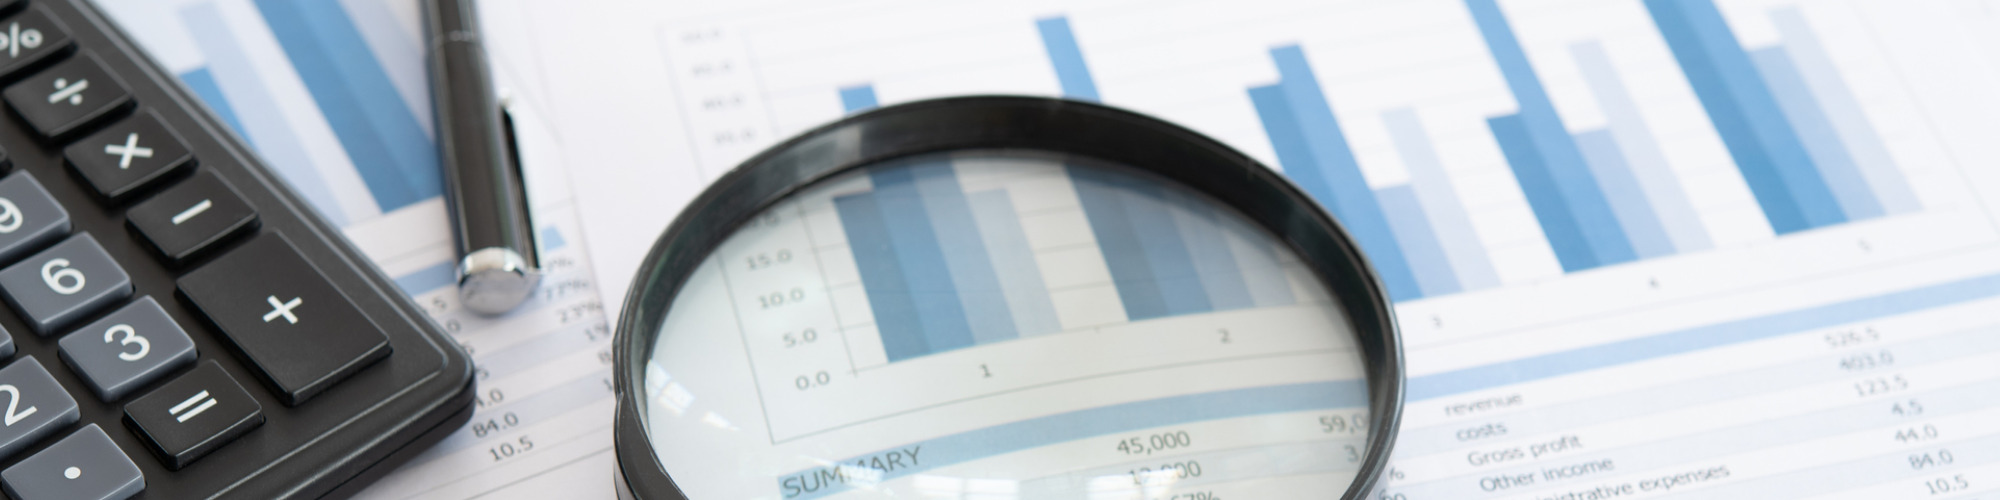 Auditing Financial Statements - The ‘Big’ Issues in One Day